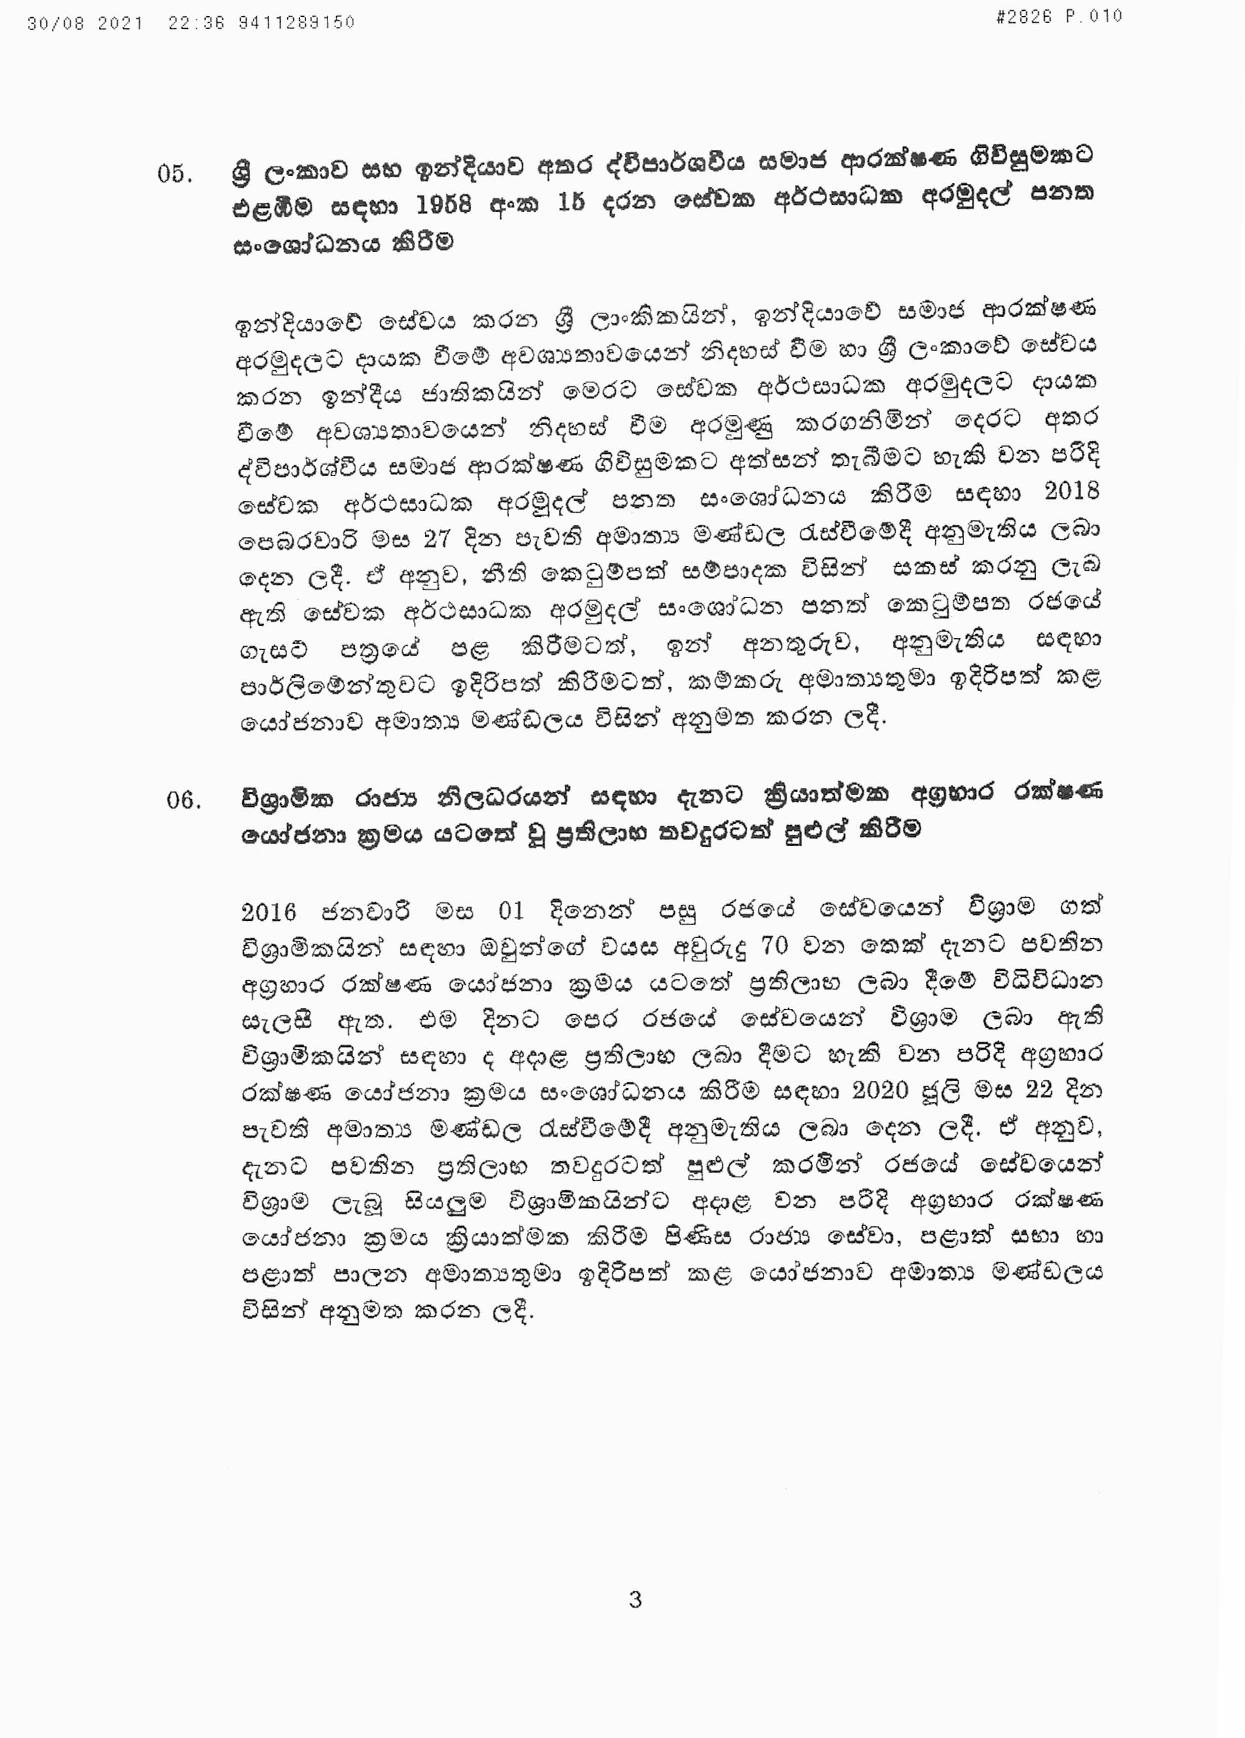 Cabinet Decision on 30.08.2021 Sinhala page 003